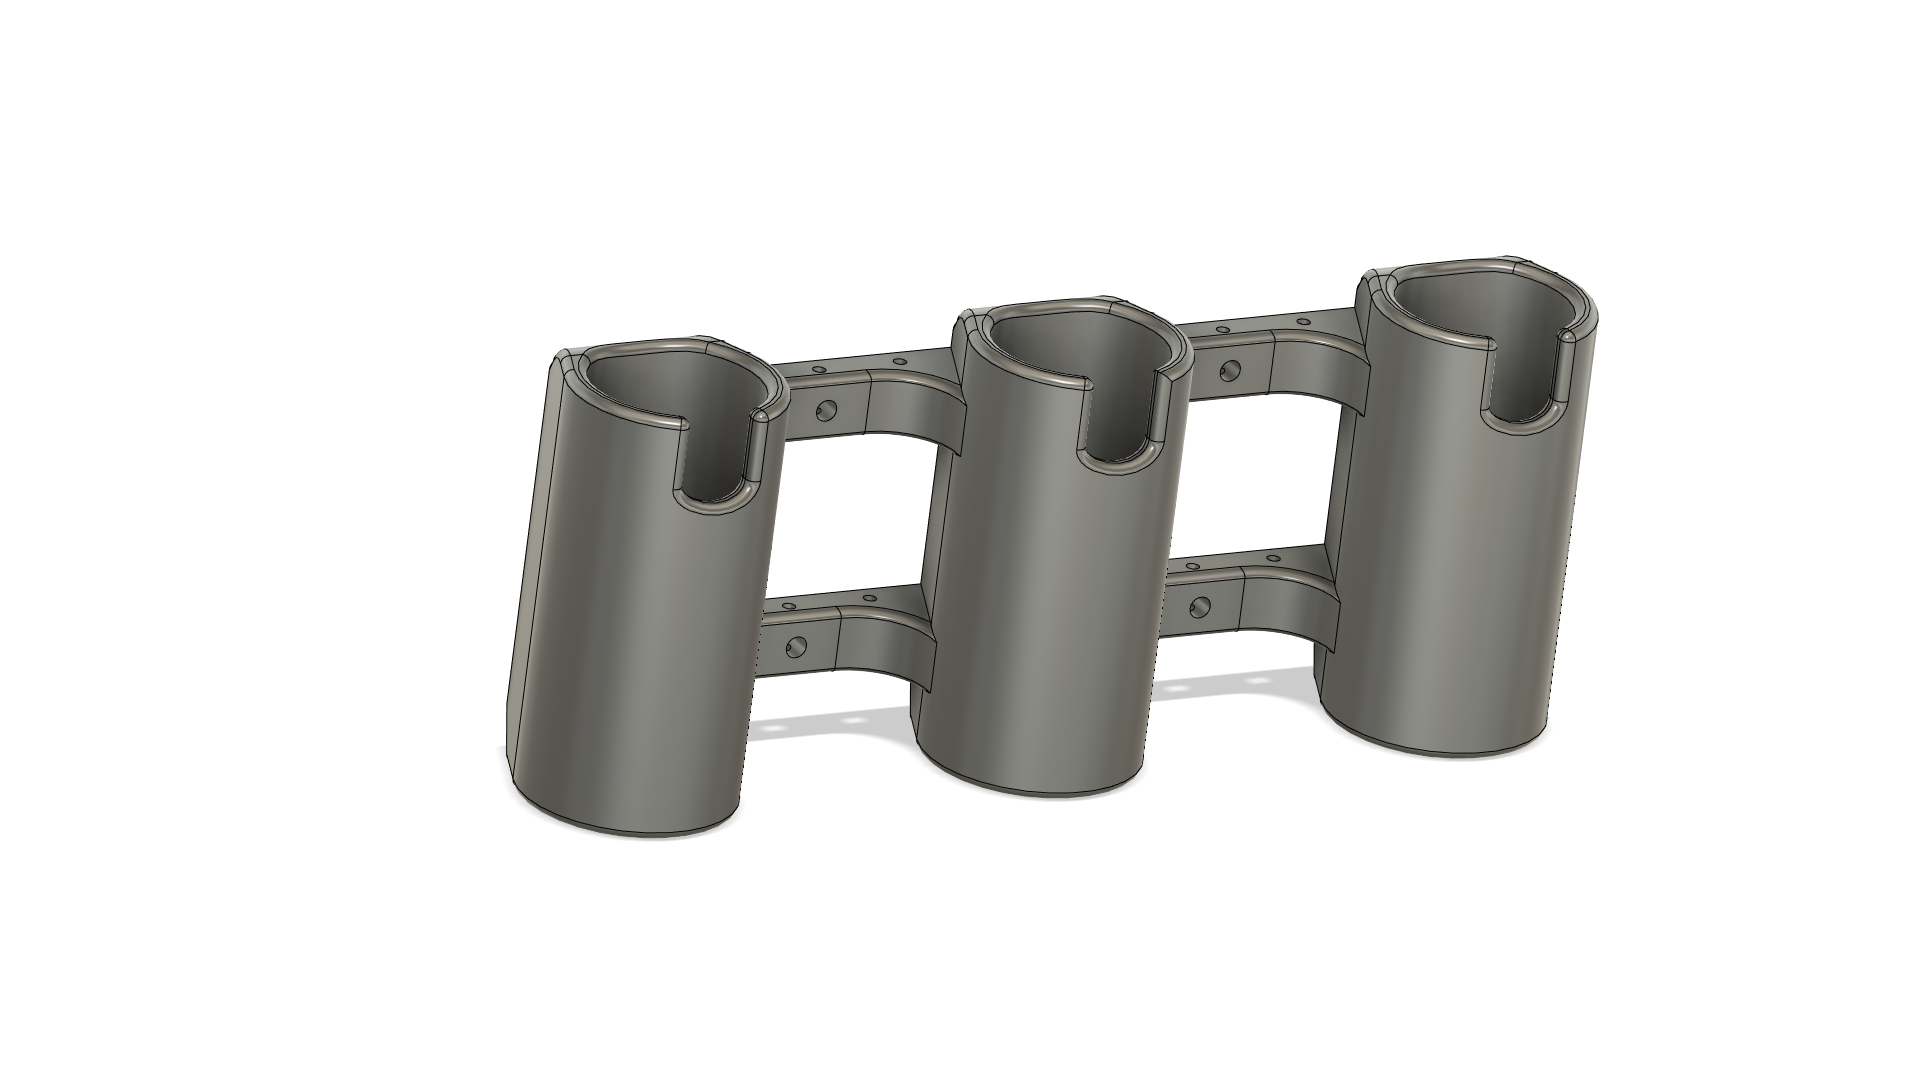 Fishing rod holder by Cmarlow, Download free STL model